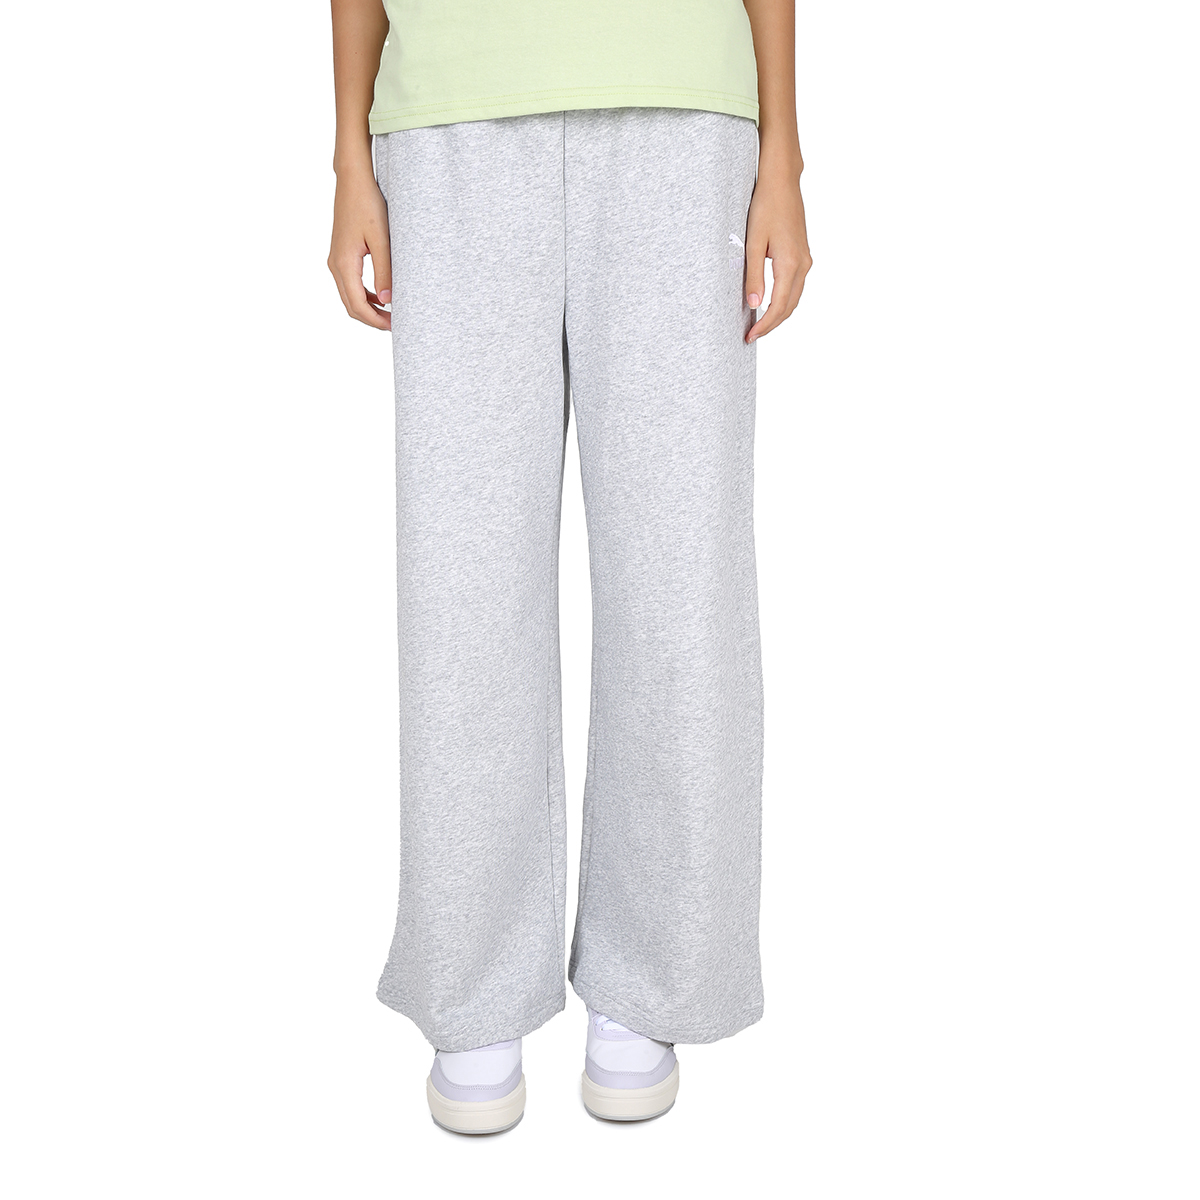 Pantalón Puma Classics Relaxed Cre Mujer Algodón,  image number null